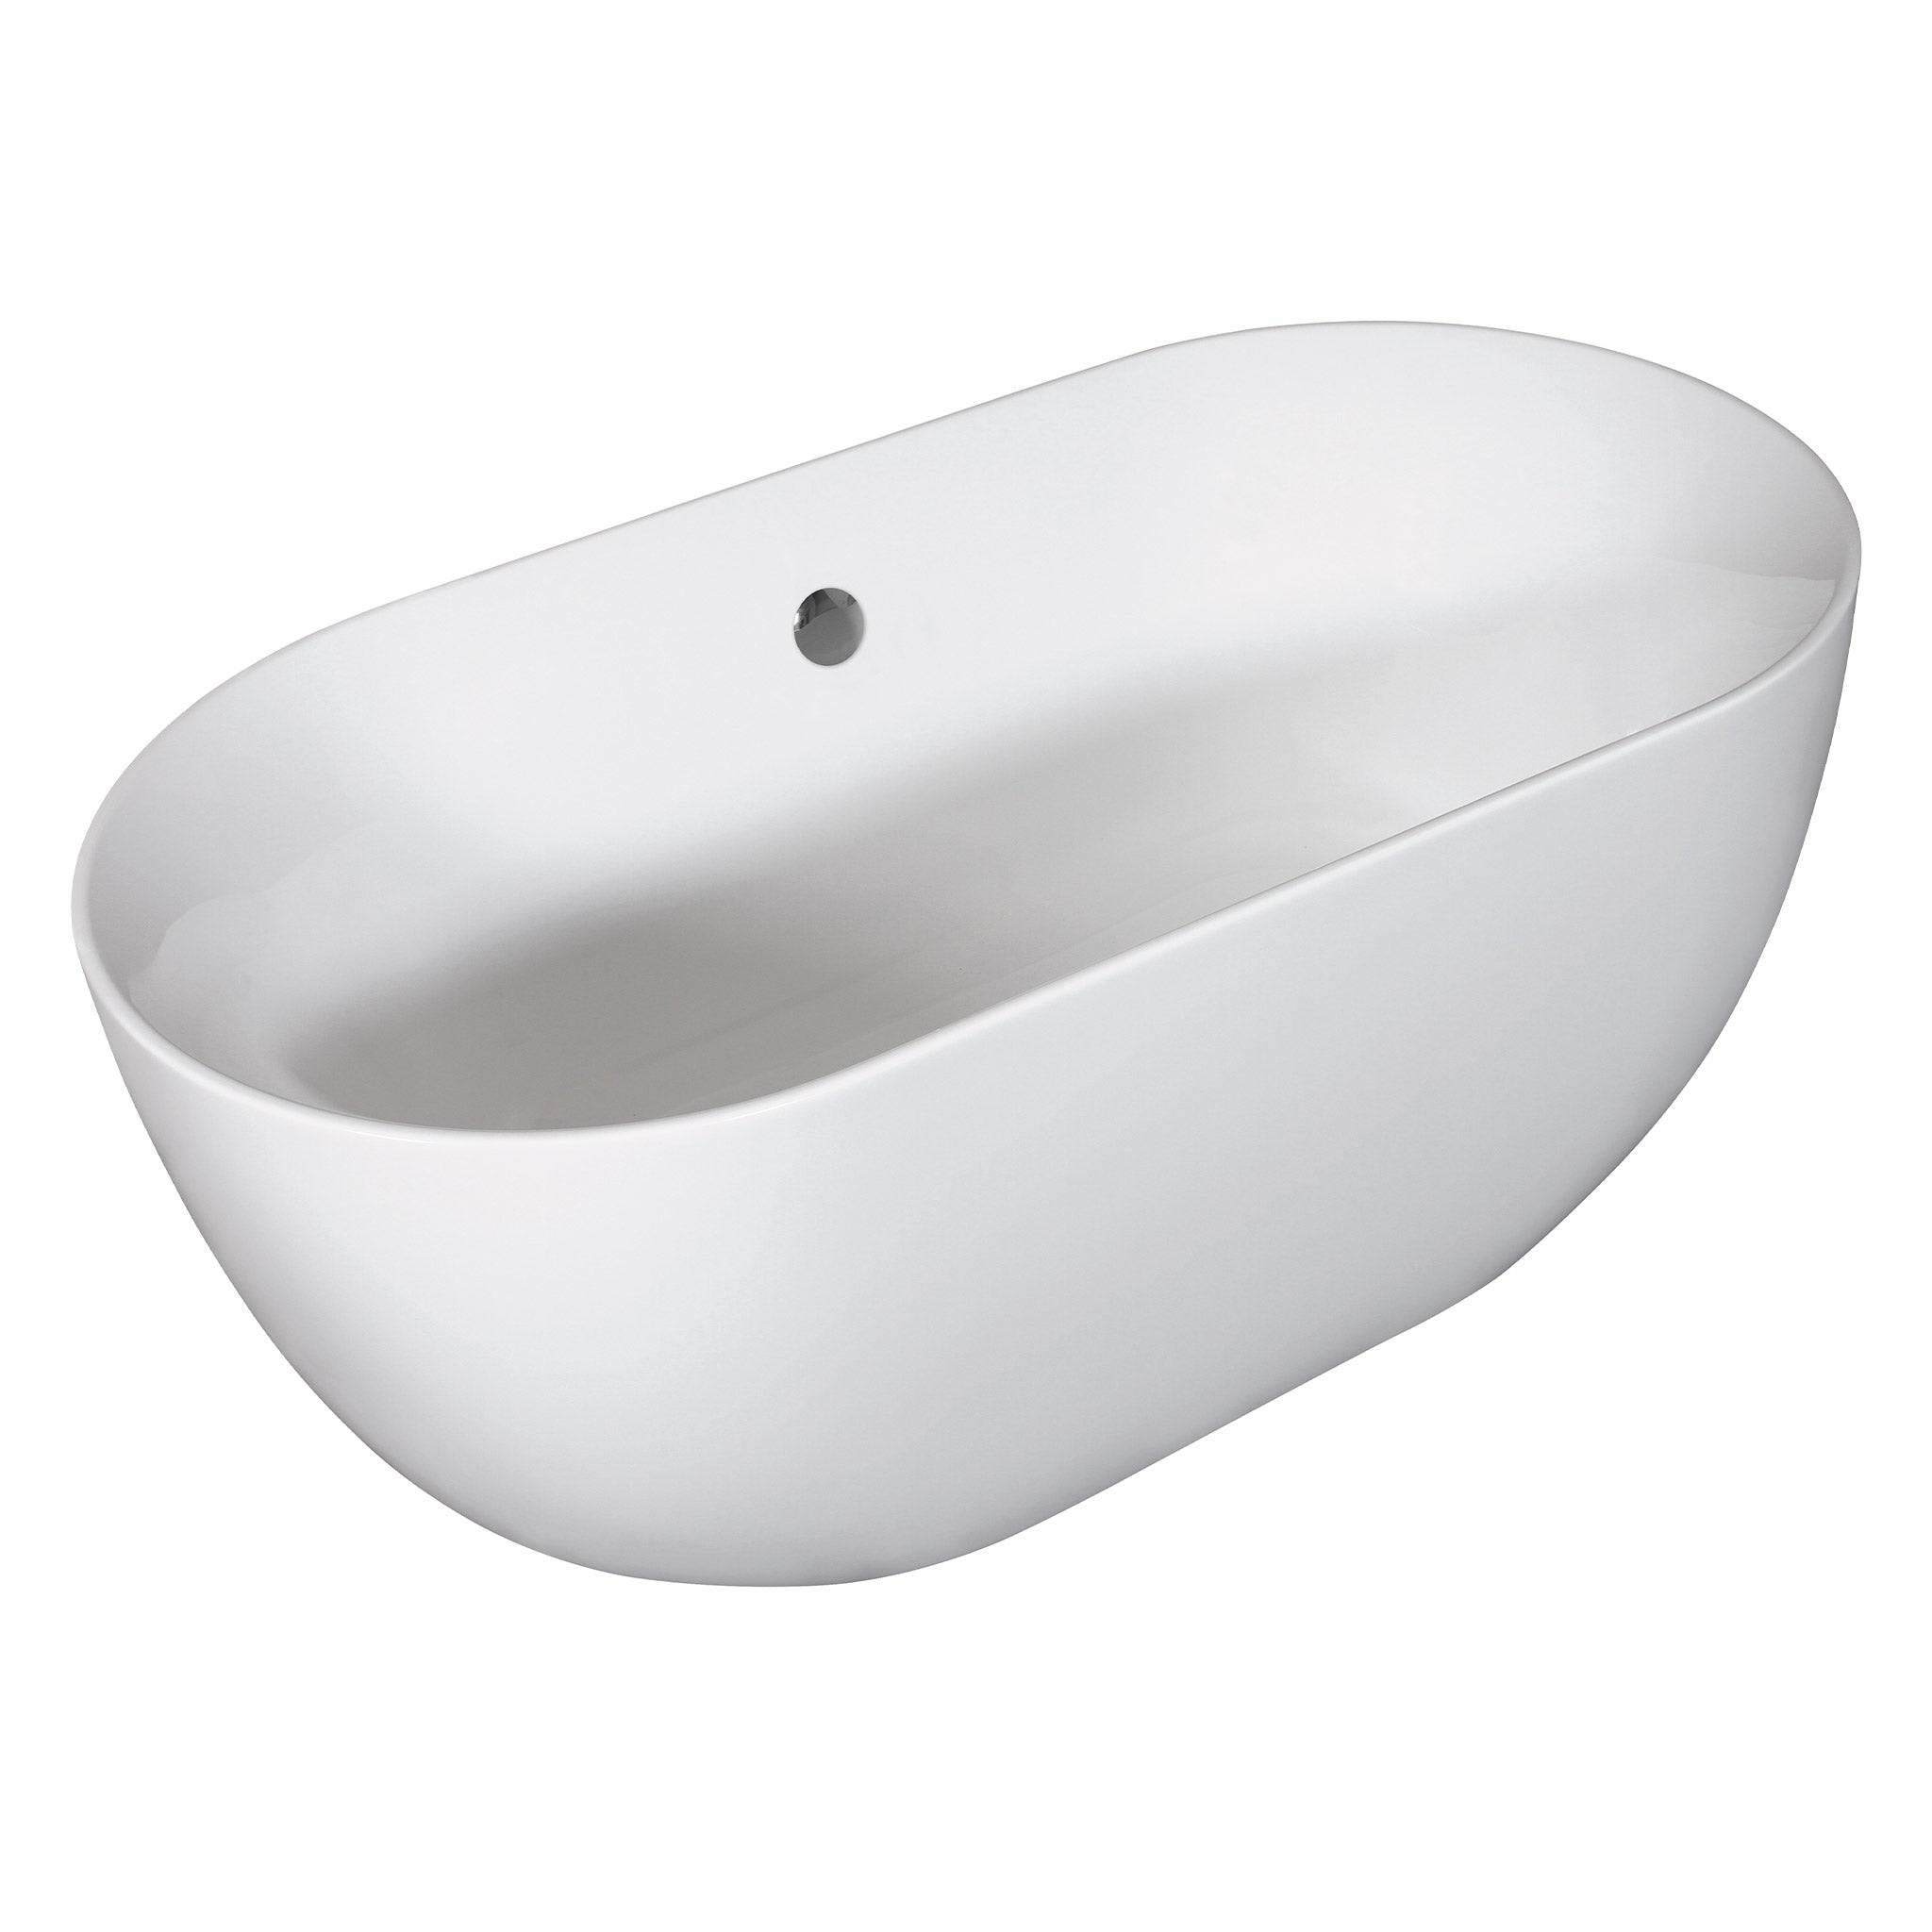 BC Designs Dinkee Double Ended Acrymite Bath 1500 x 780mm